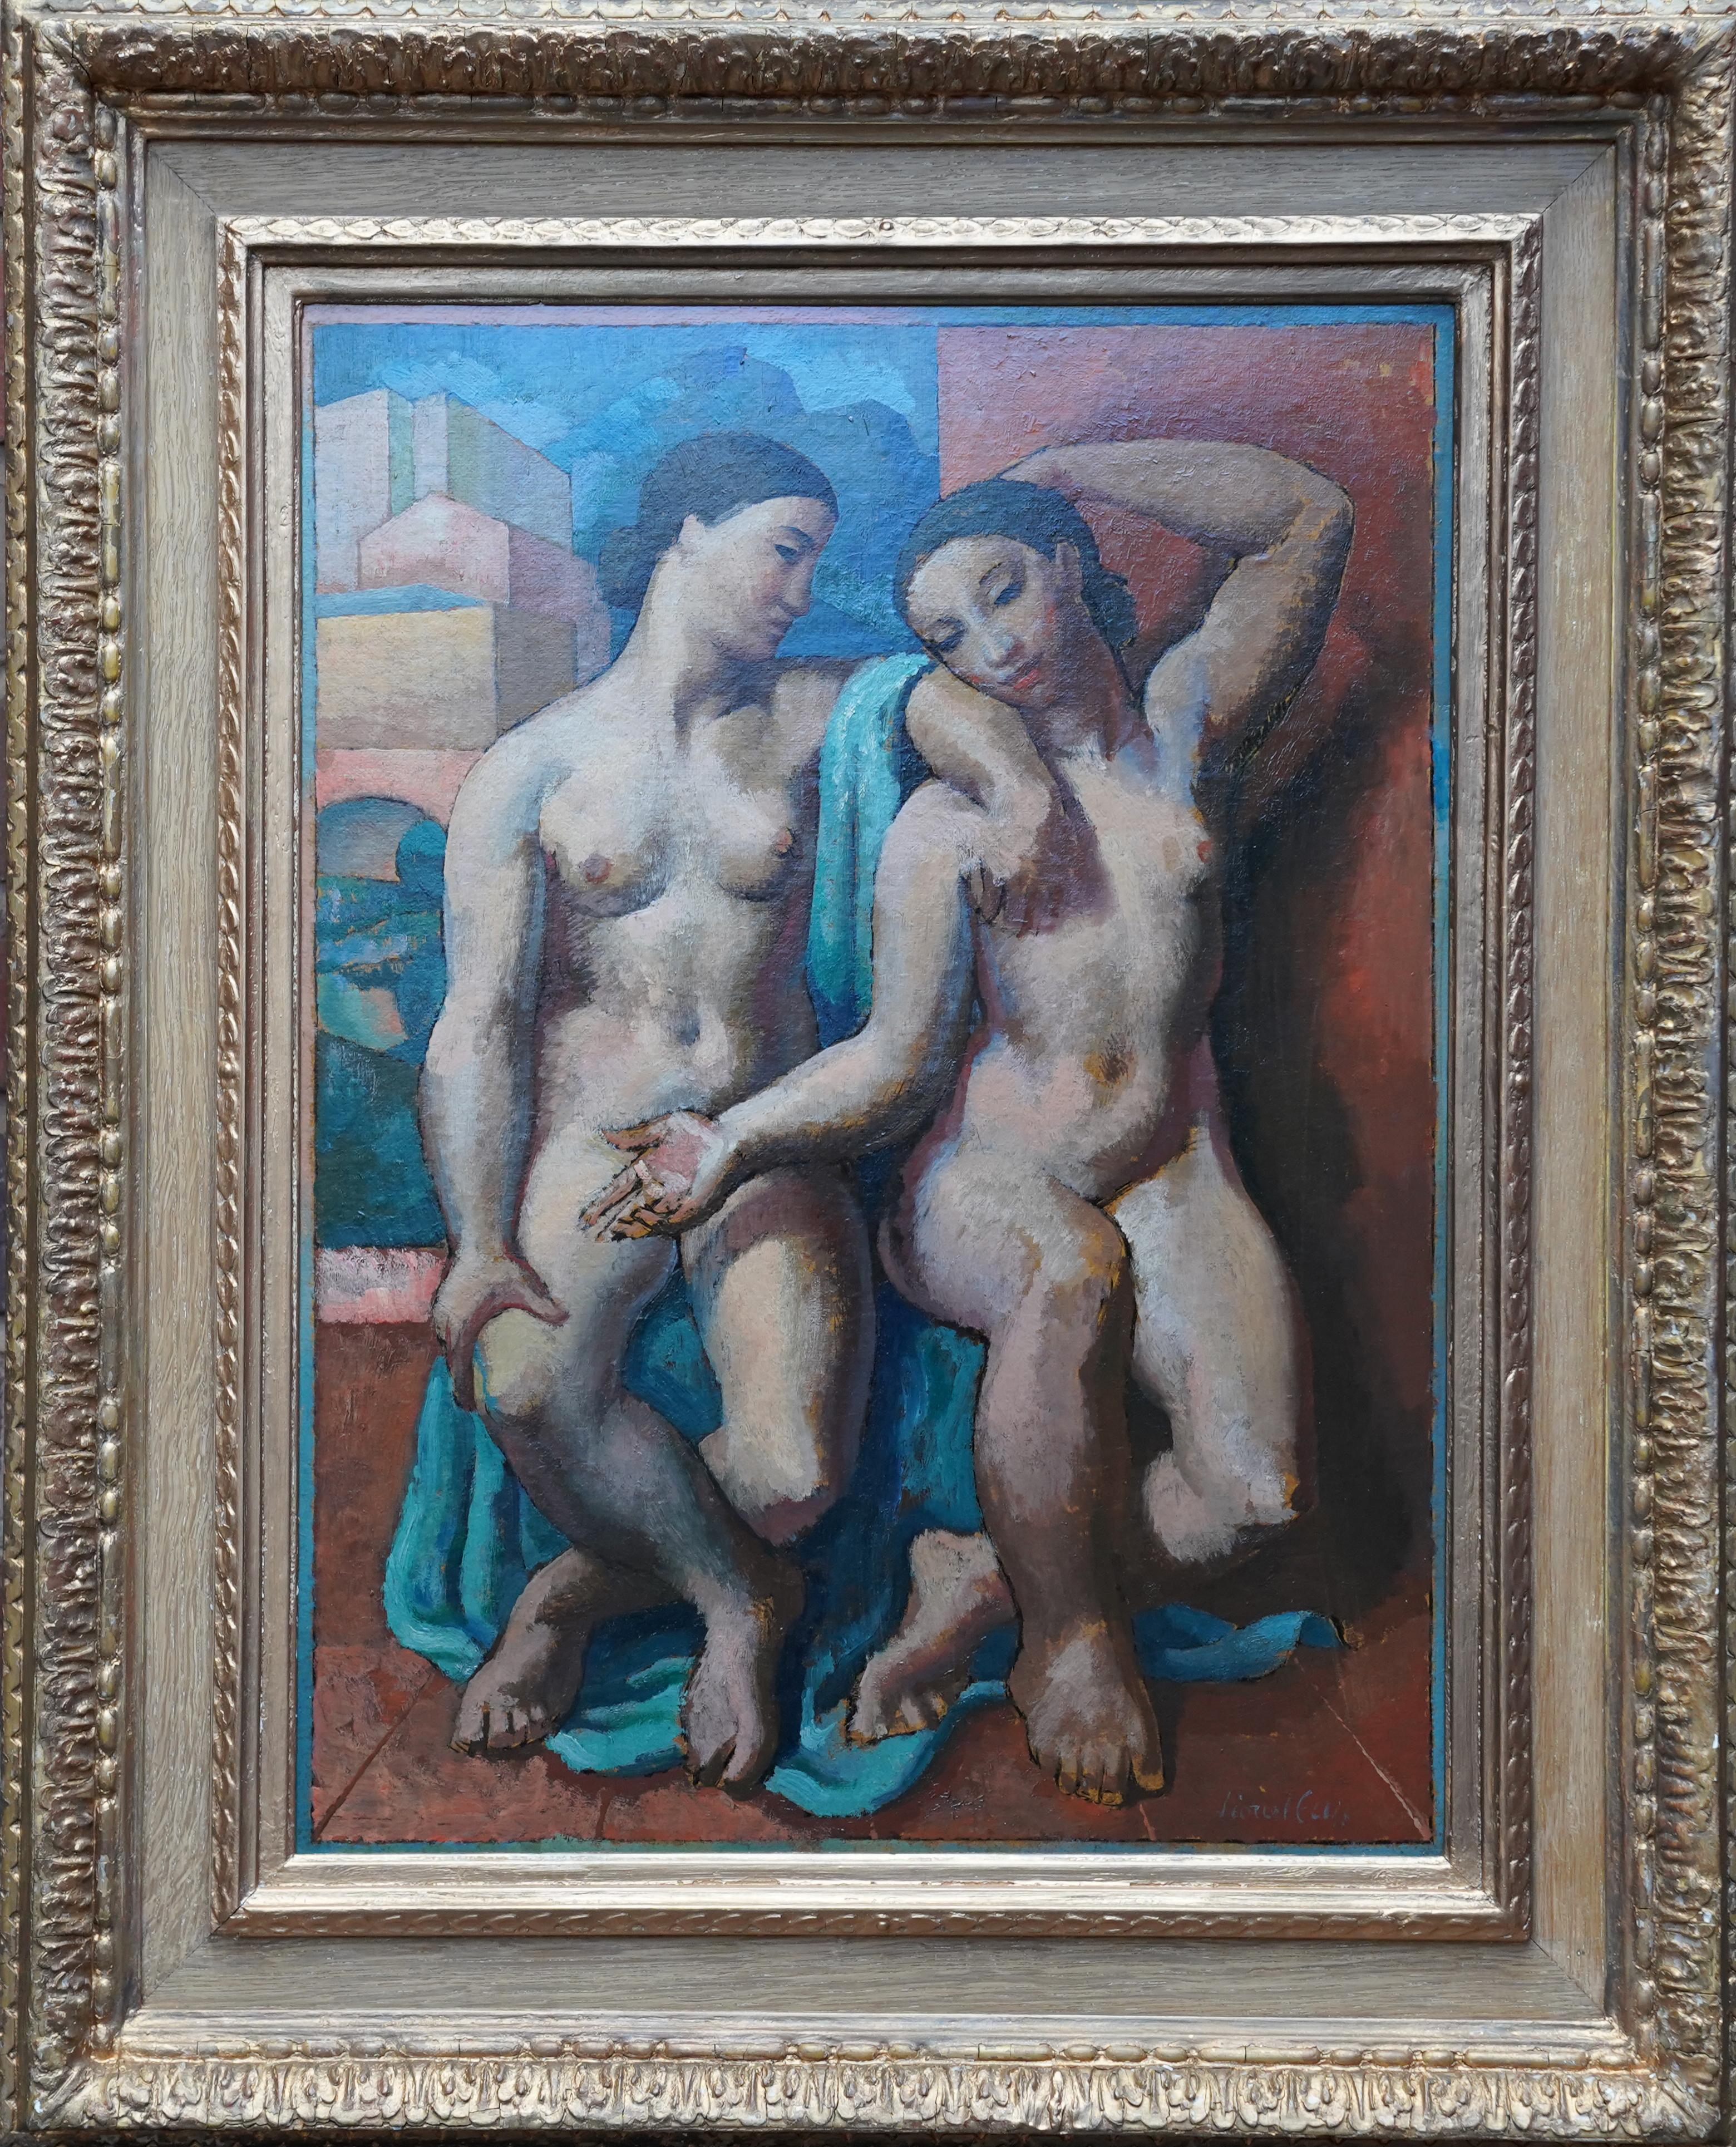 Portrait of Two Seated Nude Women - British Modernist 1930's oil painting For Sale 10